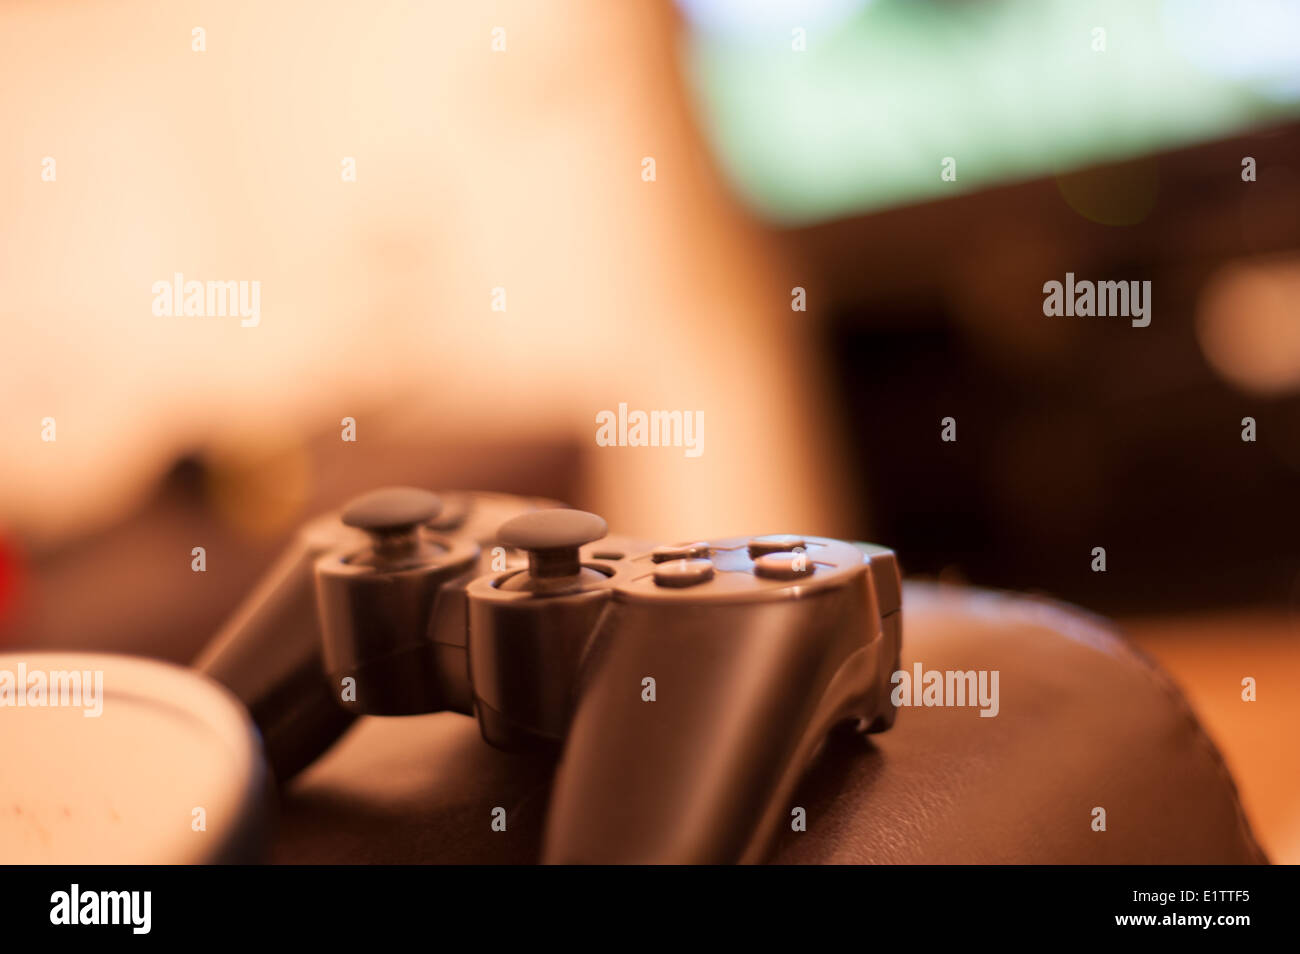 games controller sitting on a sofa arm with football game playing in background Stock Photo